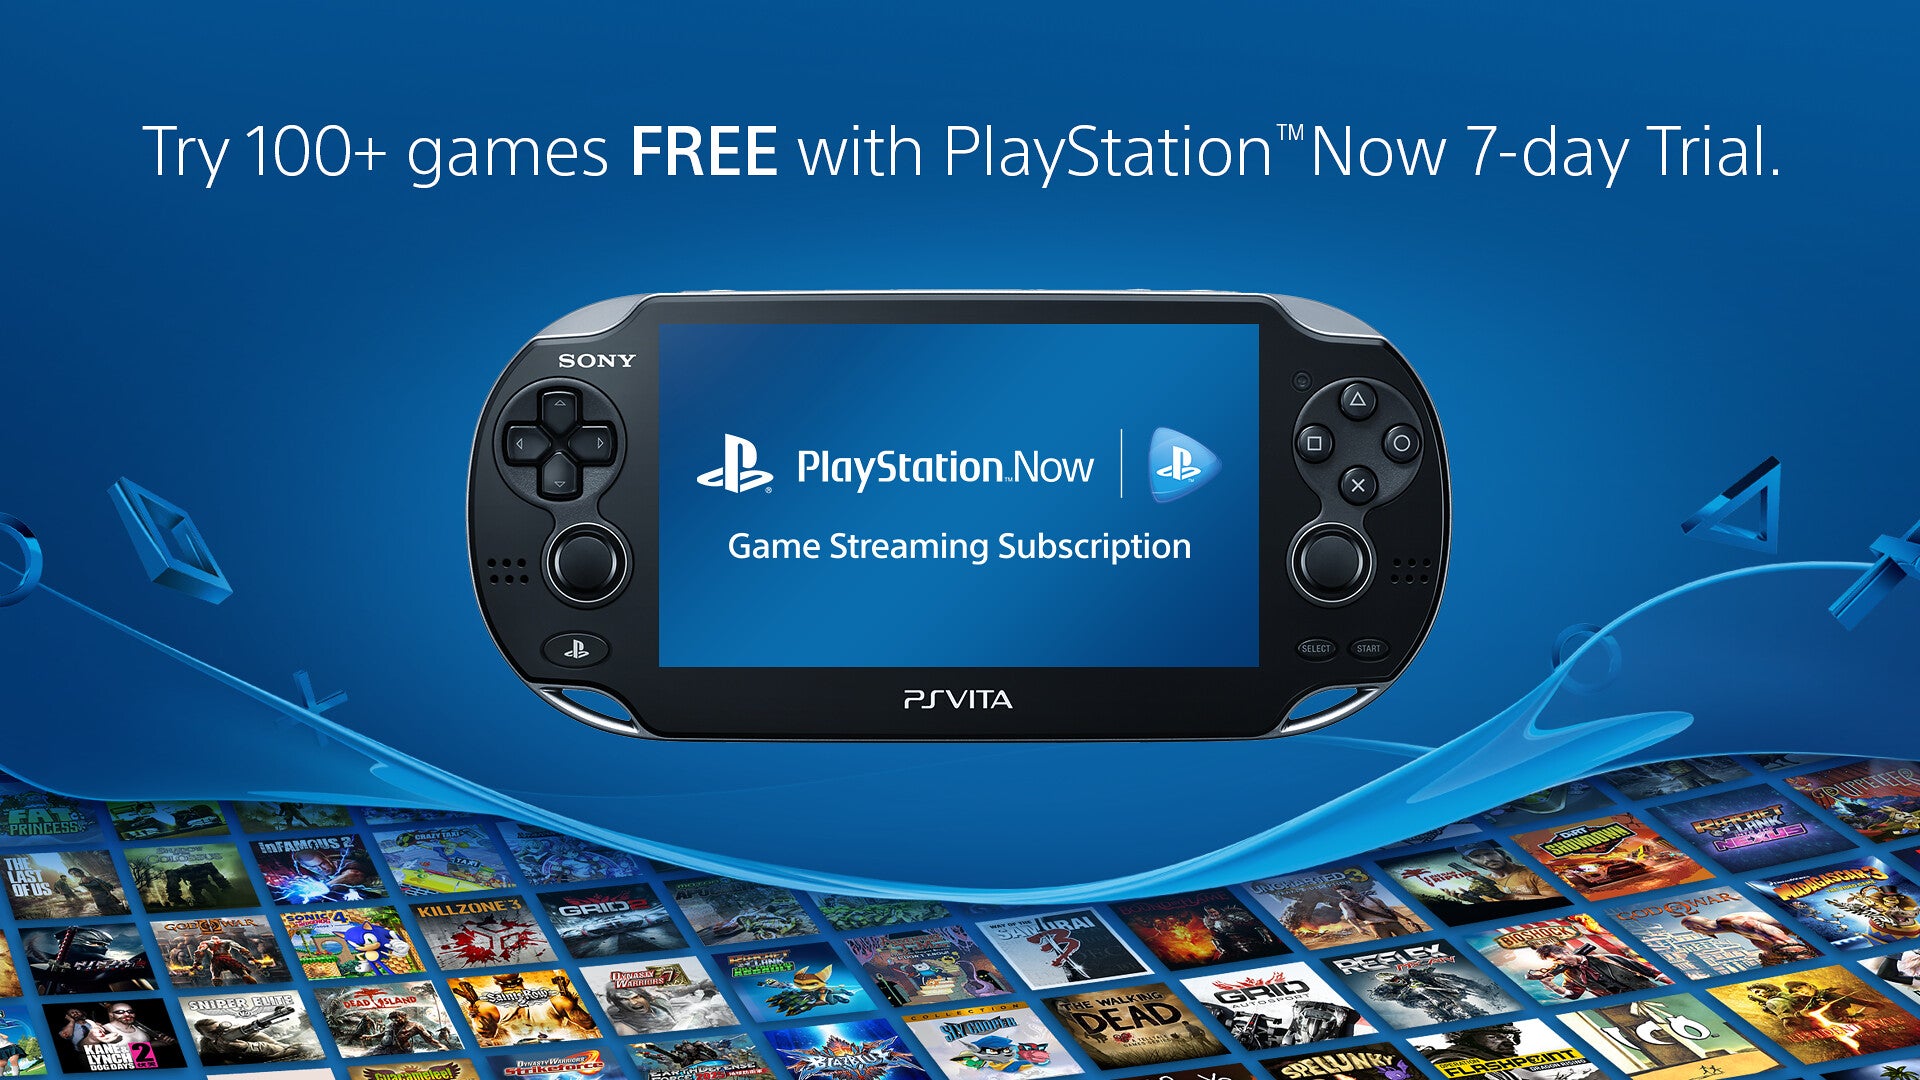 An ad with a picture of the Vita and the tagline "Try 100+ games FREE with PlayStation Now 7-day trial"